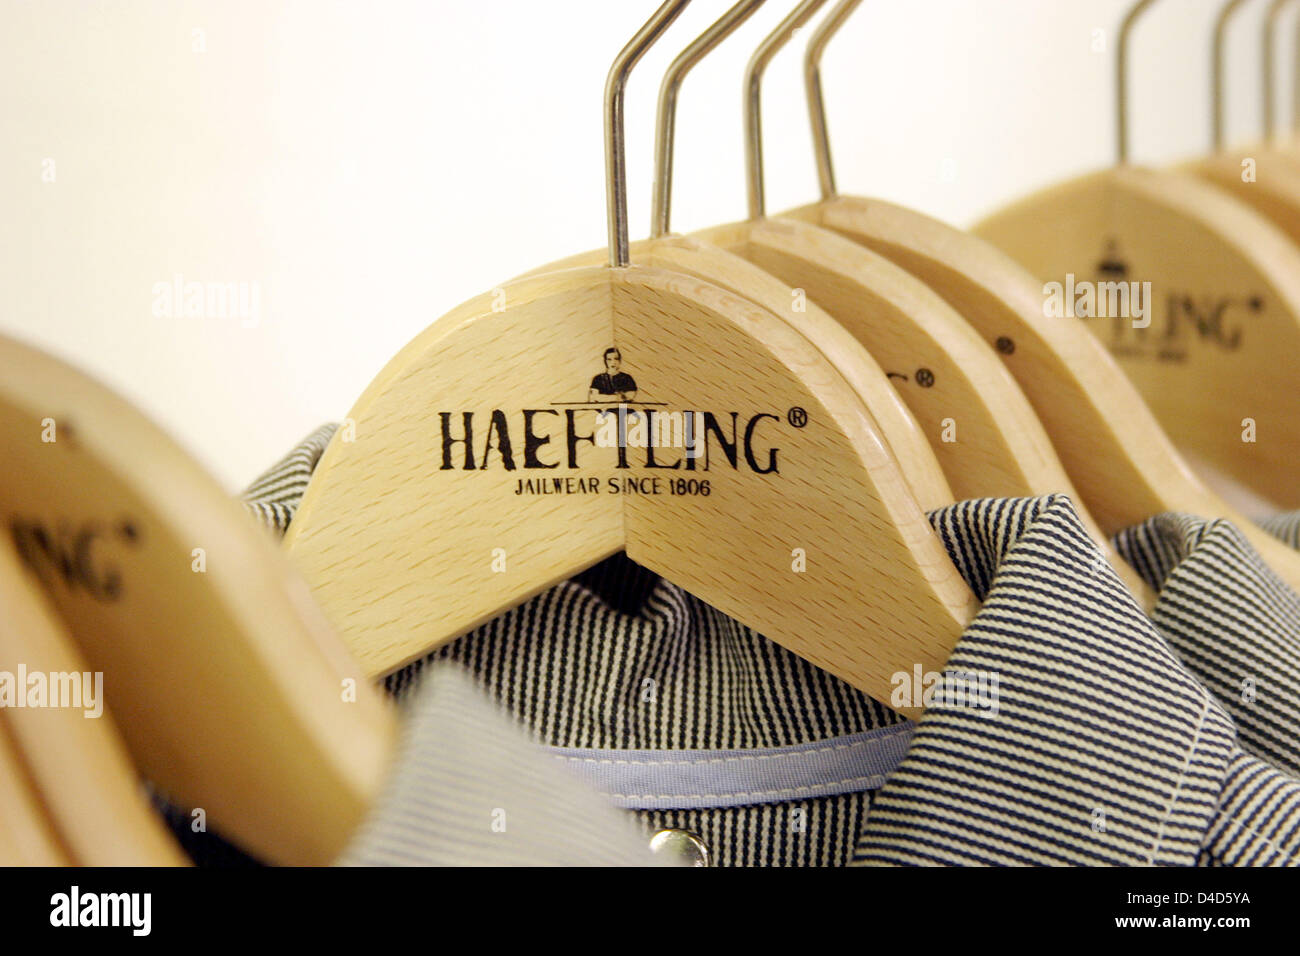 Shirts by 'Haeftling' ('Prisoner') on a hanger are for sale at the new 'Haeftling Jailwear' store in Berlin, Germany, 21 February 2008. At the shop, Stefan Bohle, brand advertiser for 'Haeftling Jailwear', sells clothing made by prisoners of the Tegel correction facility. The prisoners' collection is rugged, robust and rather colourless. Photo: Xamax Stock Photo